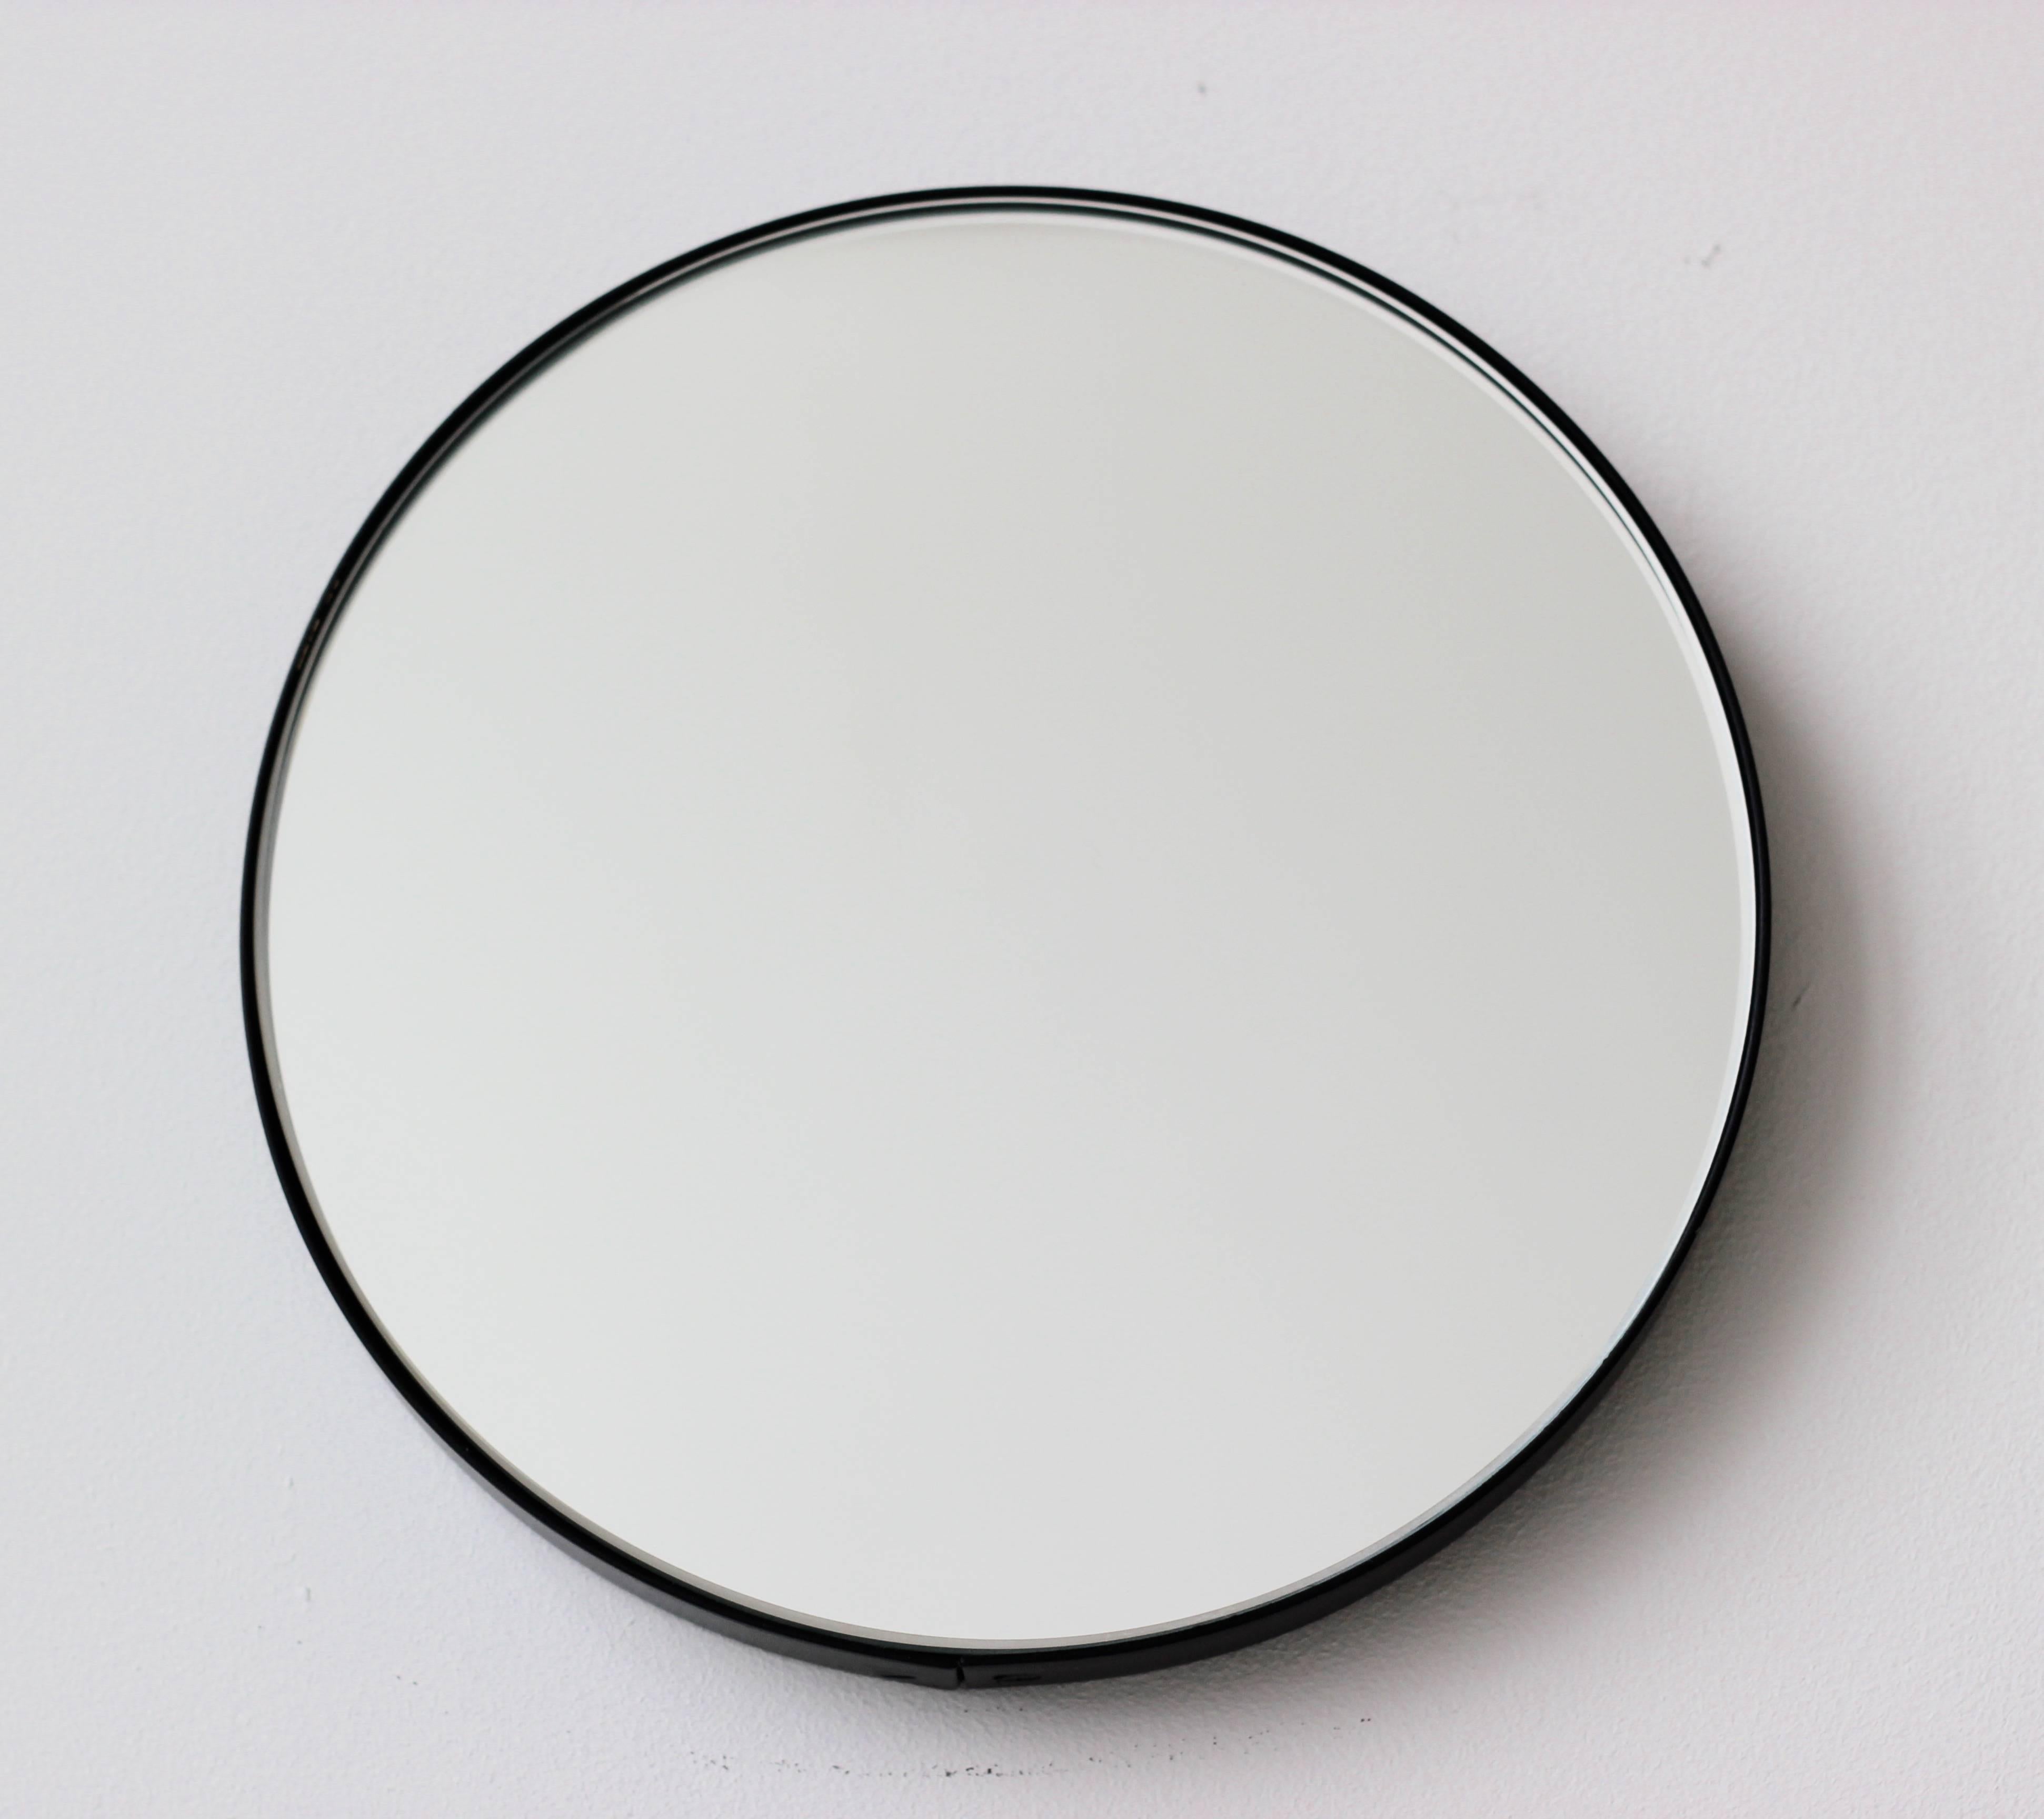 Minimalist Orbis™ round mirror with an elegant aluminium powder coated black frame. Designed and handcrafted in London, UK.

Our mirrors are designed with an integrated French cleat (split batten) system that ensures the mirror is securely mounted